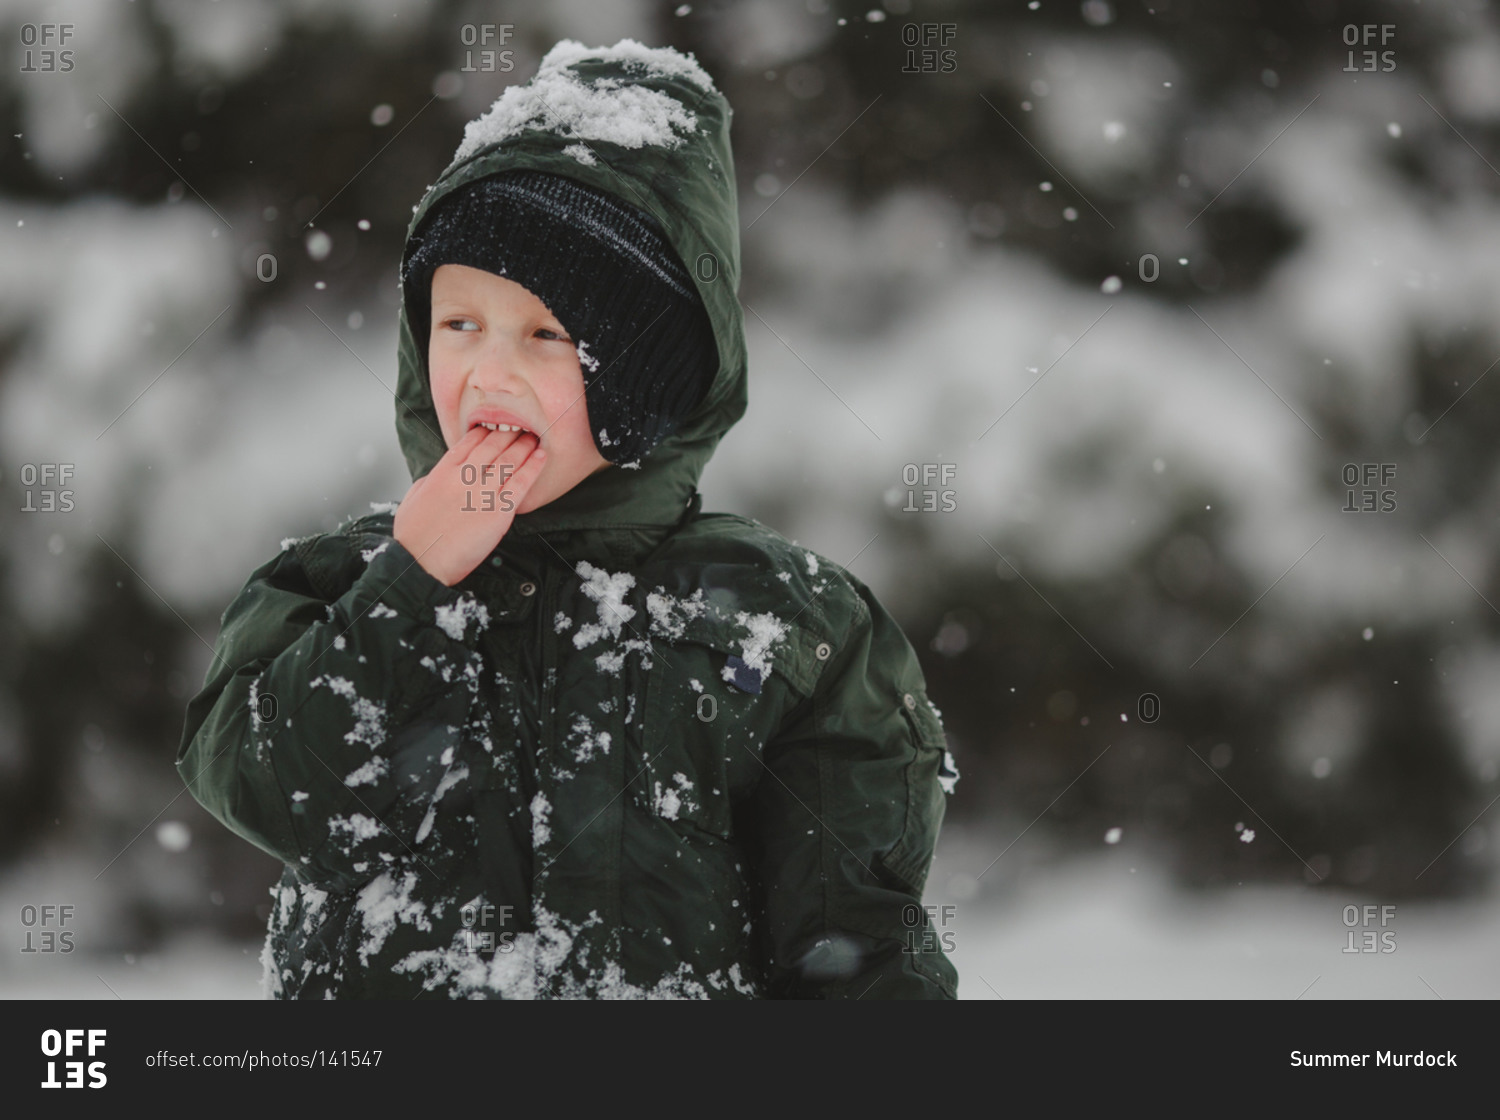 Boy in snowsuit eating snow outside